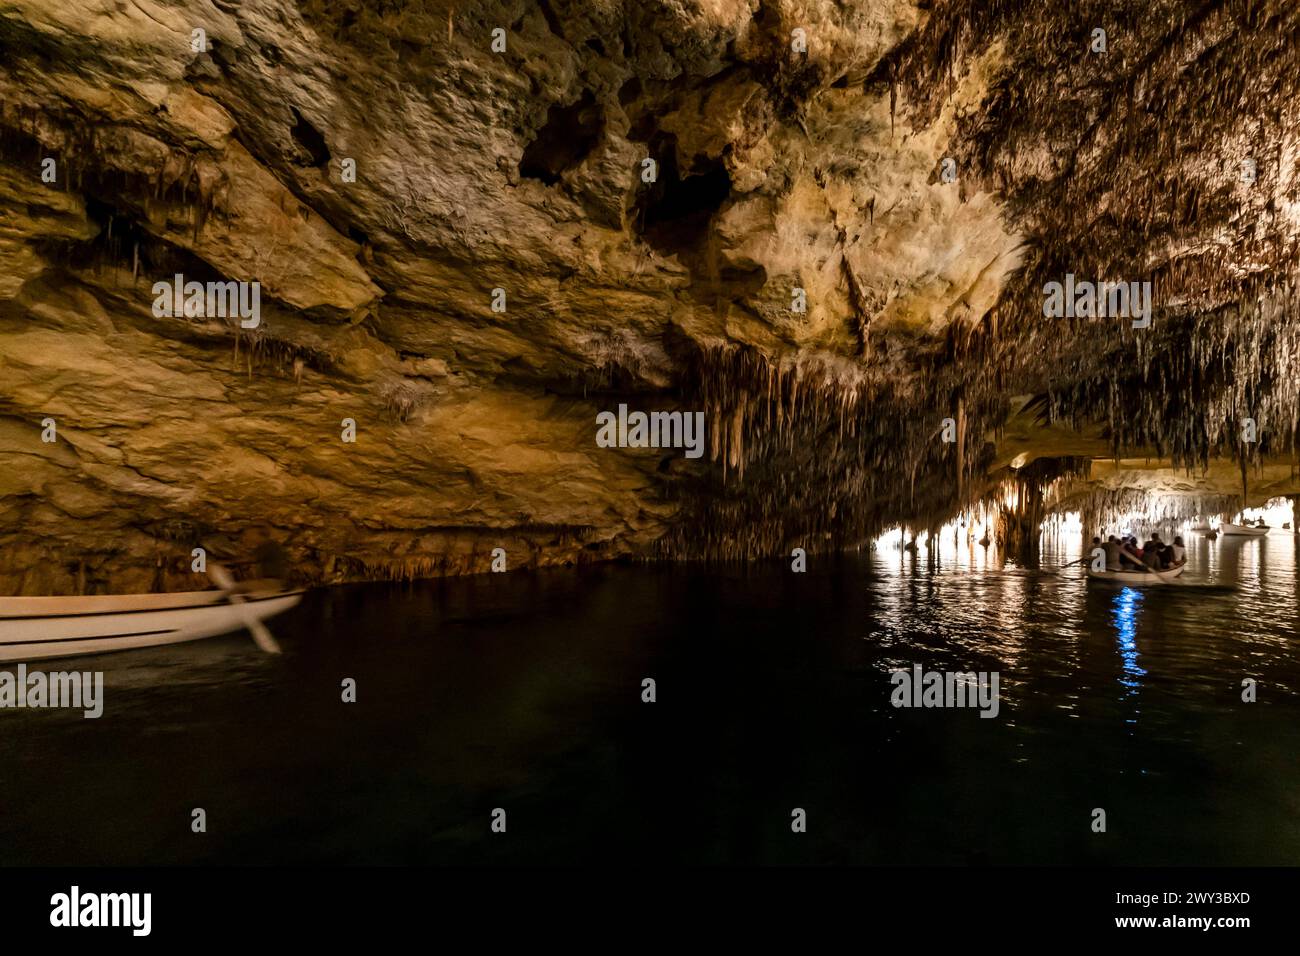 Amazing photos of Drach Caves in Mallorca, Spain Stock Photo